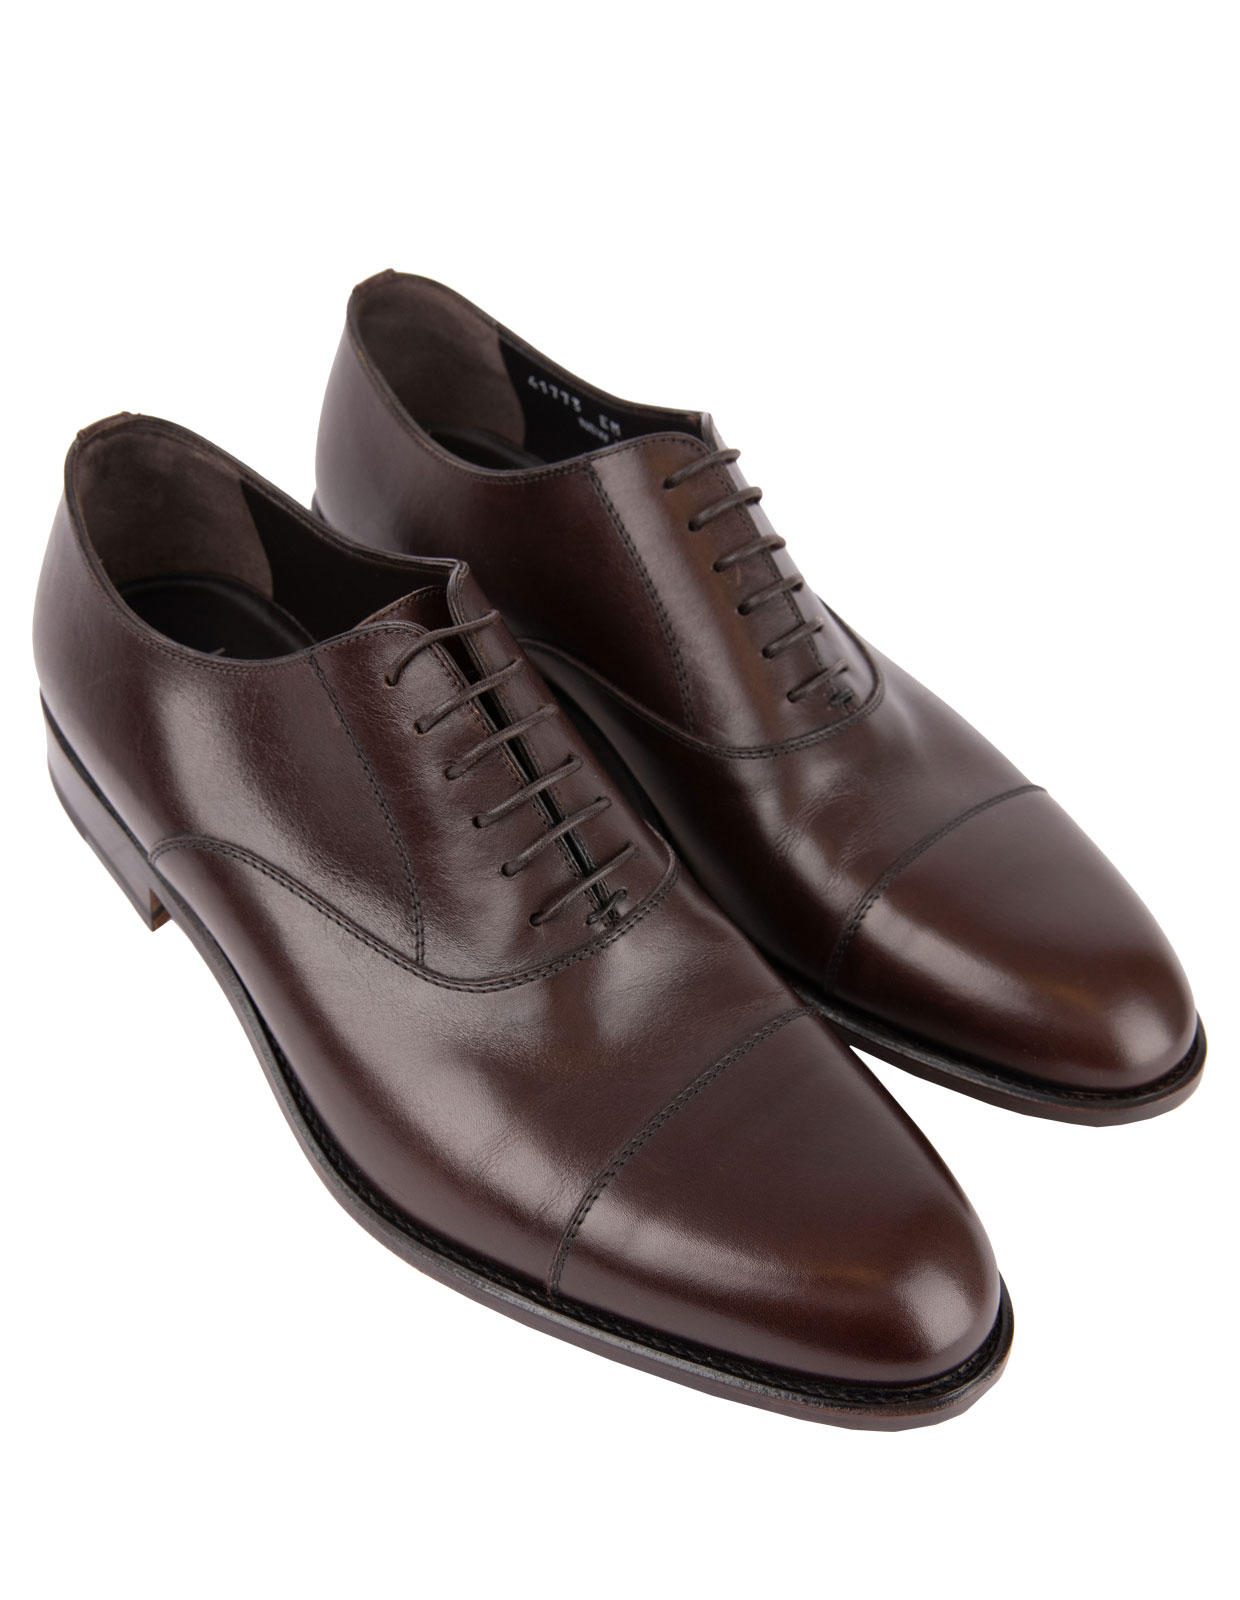 Cleveland Oxford Shoes Brun